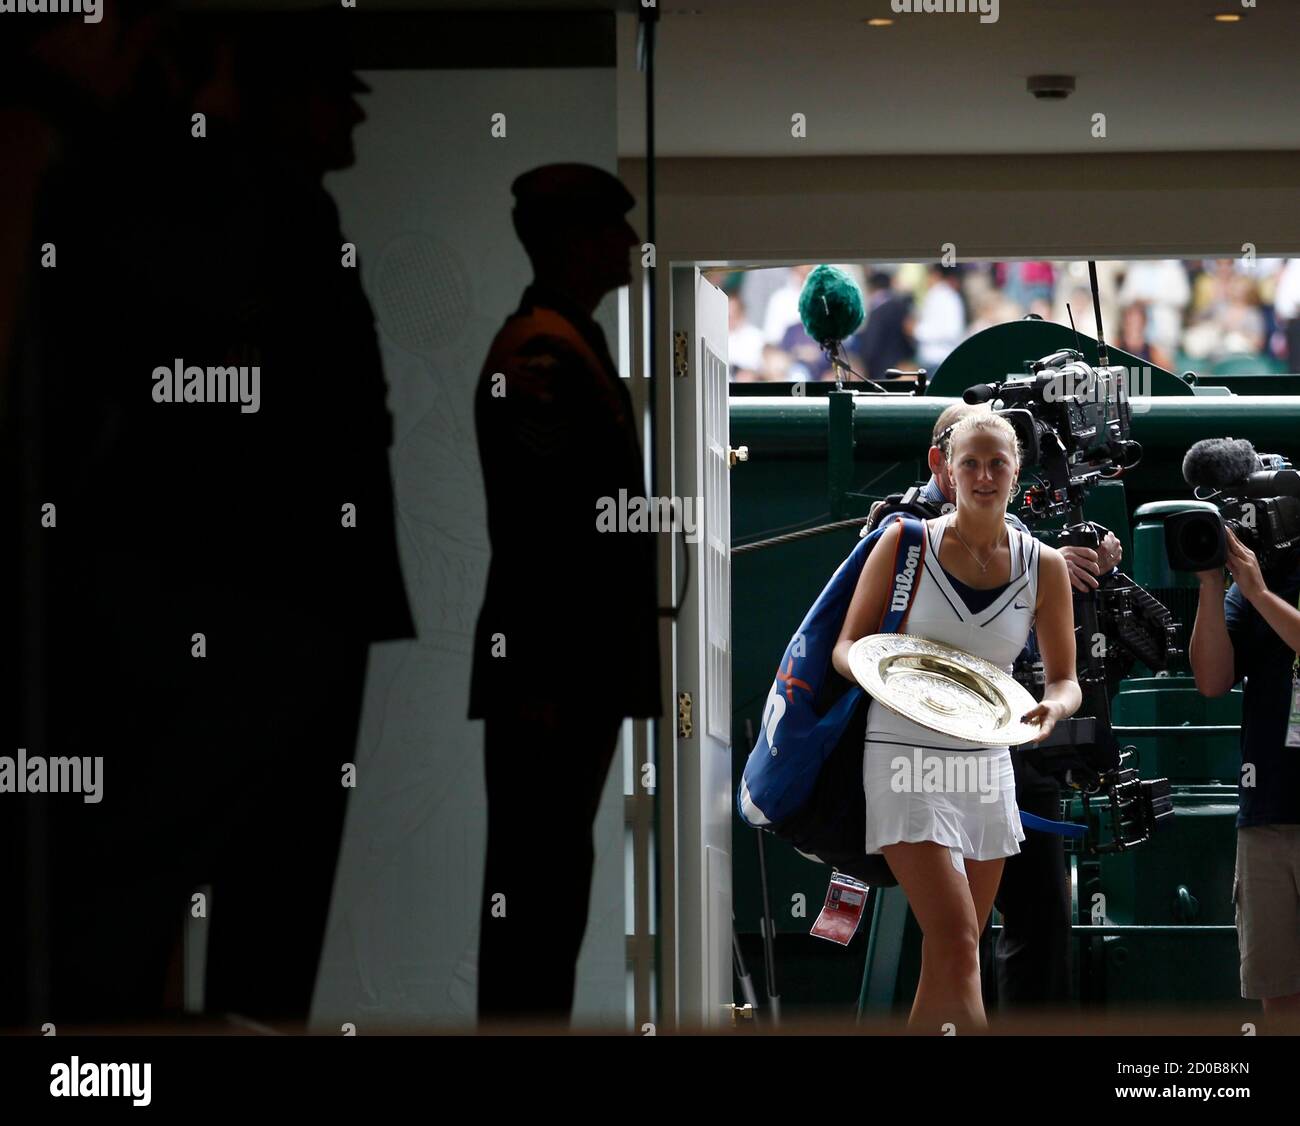 Petra Kvitova of the Czech Republic holding the winners trophy walks off Centre Court and into the clubhouse after defeating Maria Sharapova of Russia in the women's singles final at the Wimbledon tennis championships in London July 2, 2011.    REUTERS/Eddie Keogh (BRITAIN  - Tags: SPORT TENNIS IMAGE OF THE DAY TOP PICTURE) Stock Photo